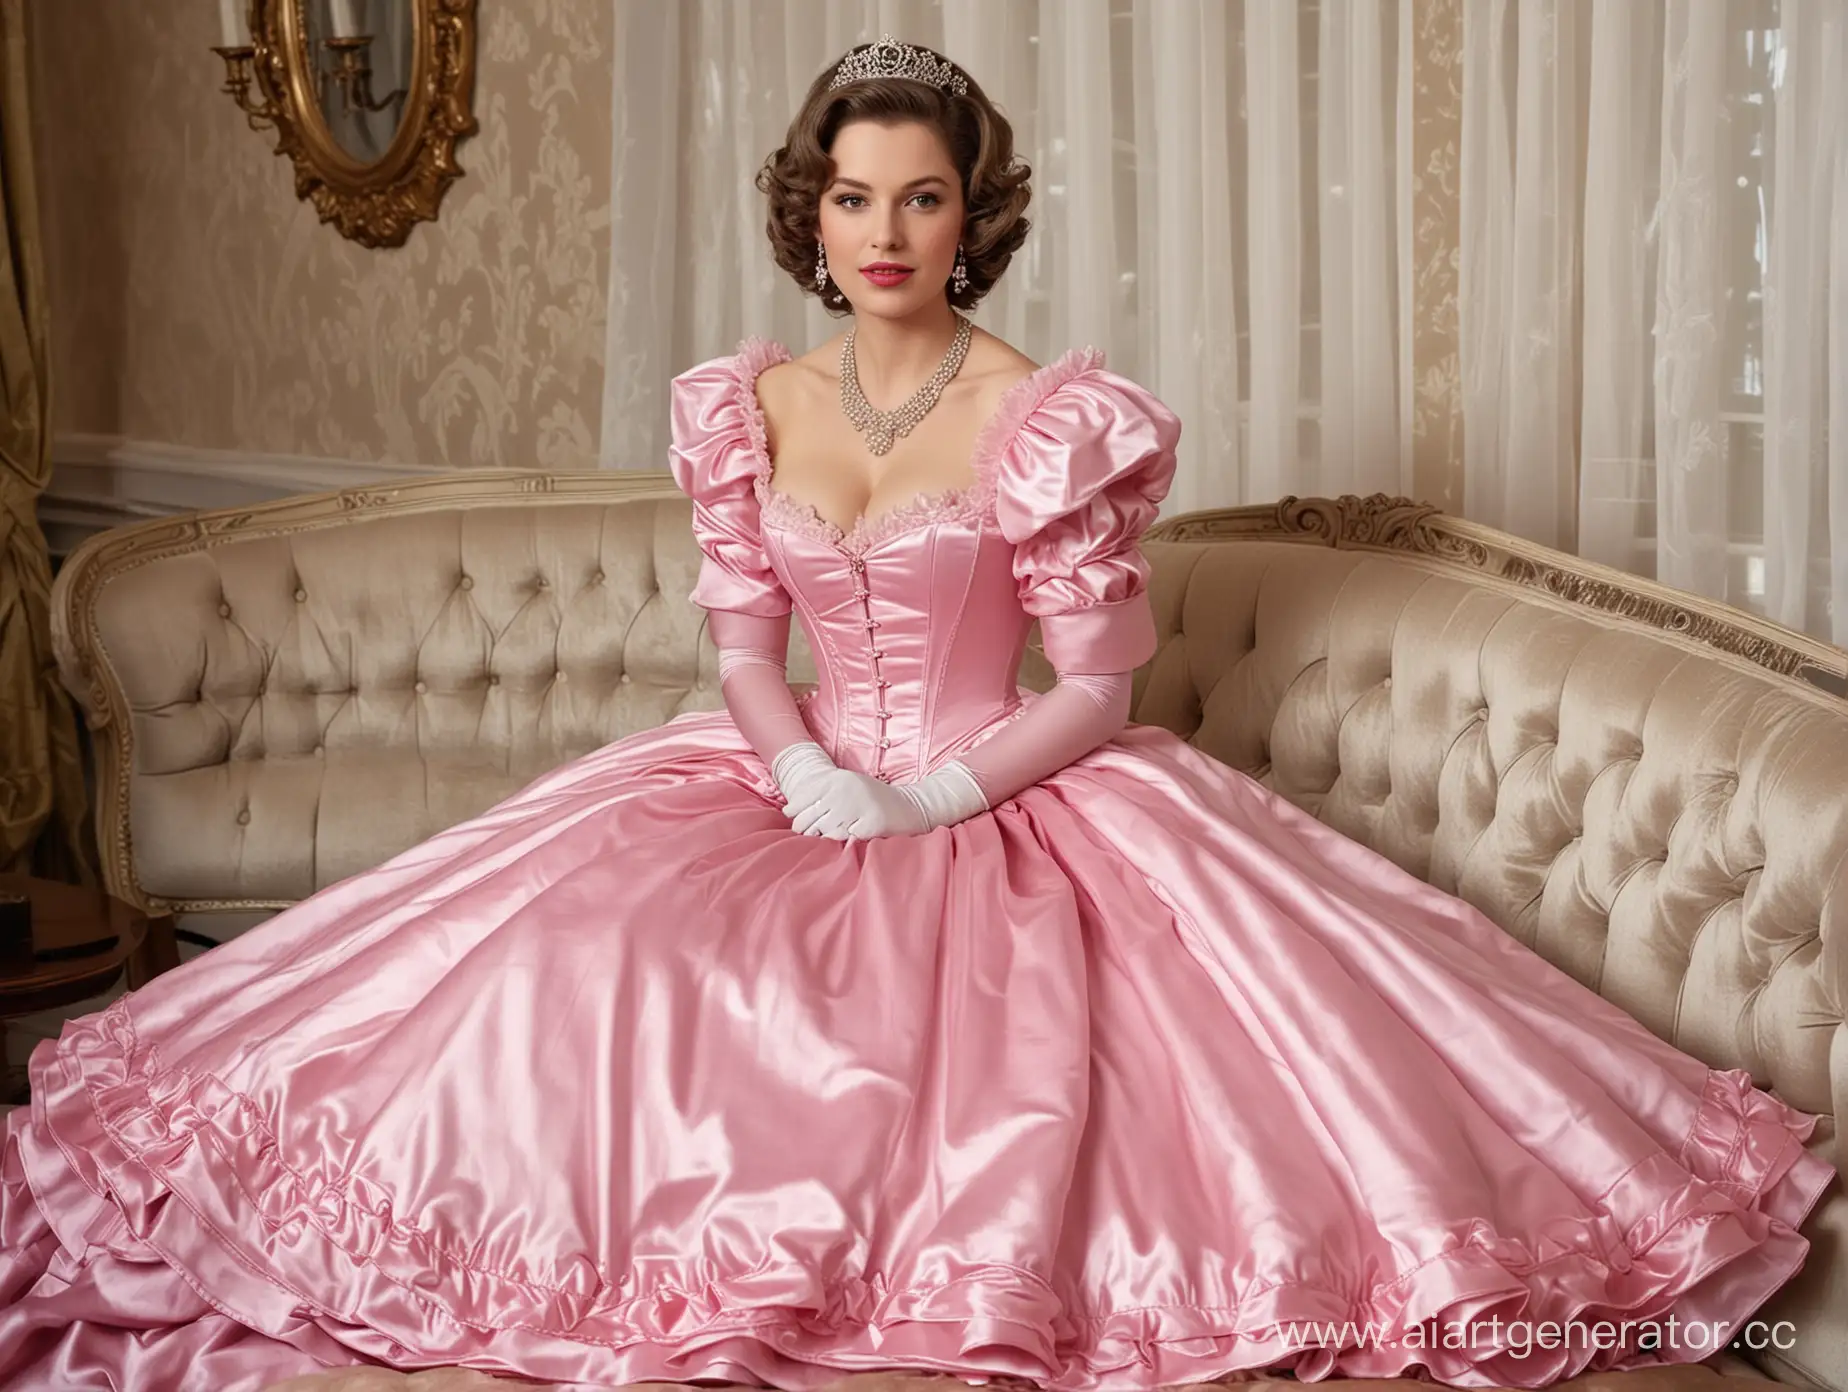 Luxurious-Queen-in-Pink-Satin-Dress-with-Steel-Corset-and-Big-Curls